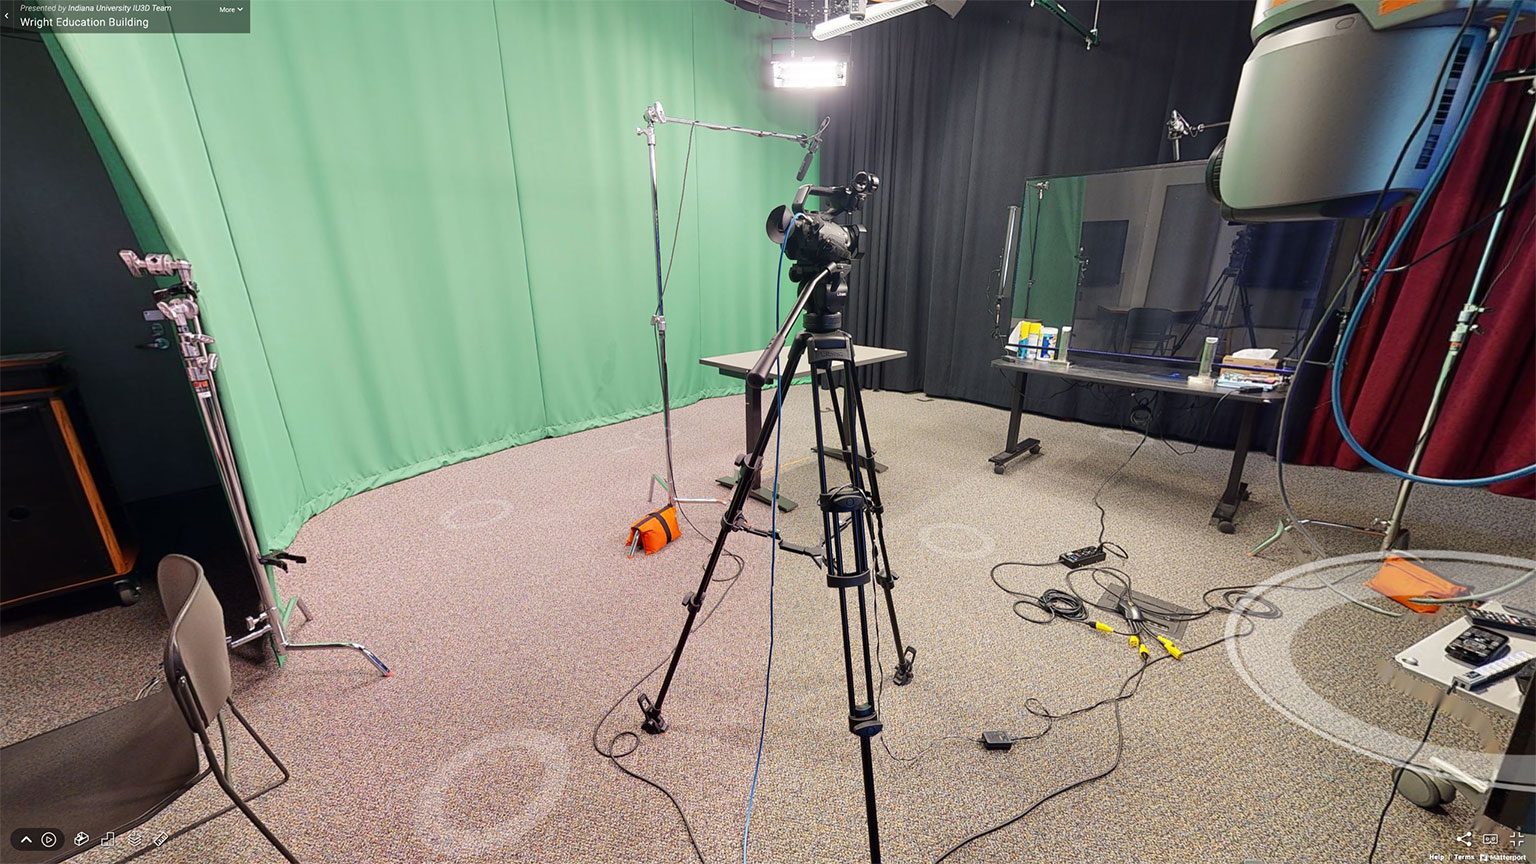 Academic media production space